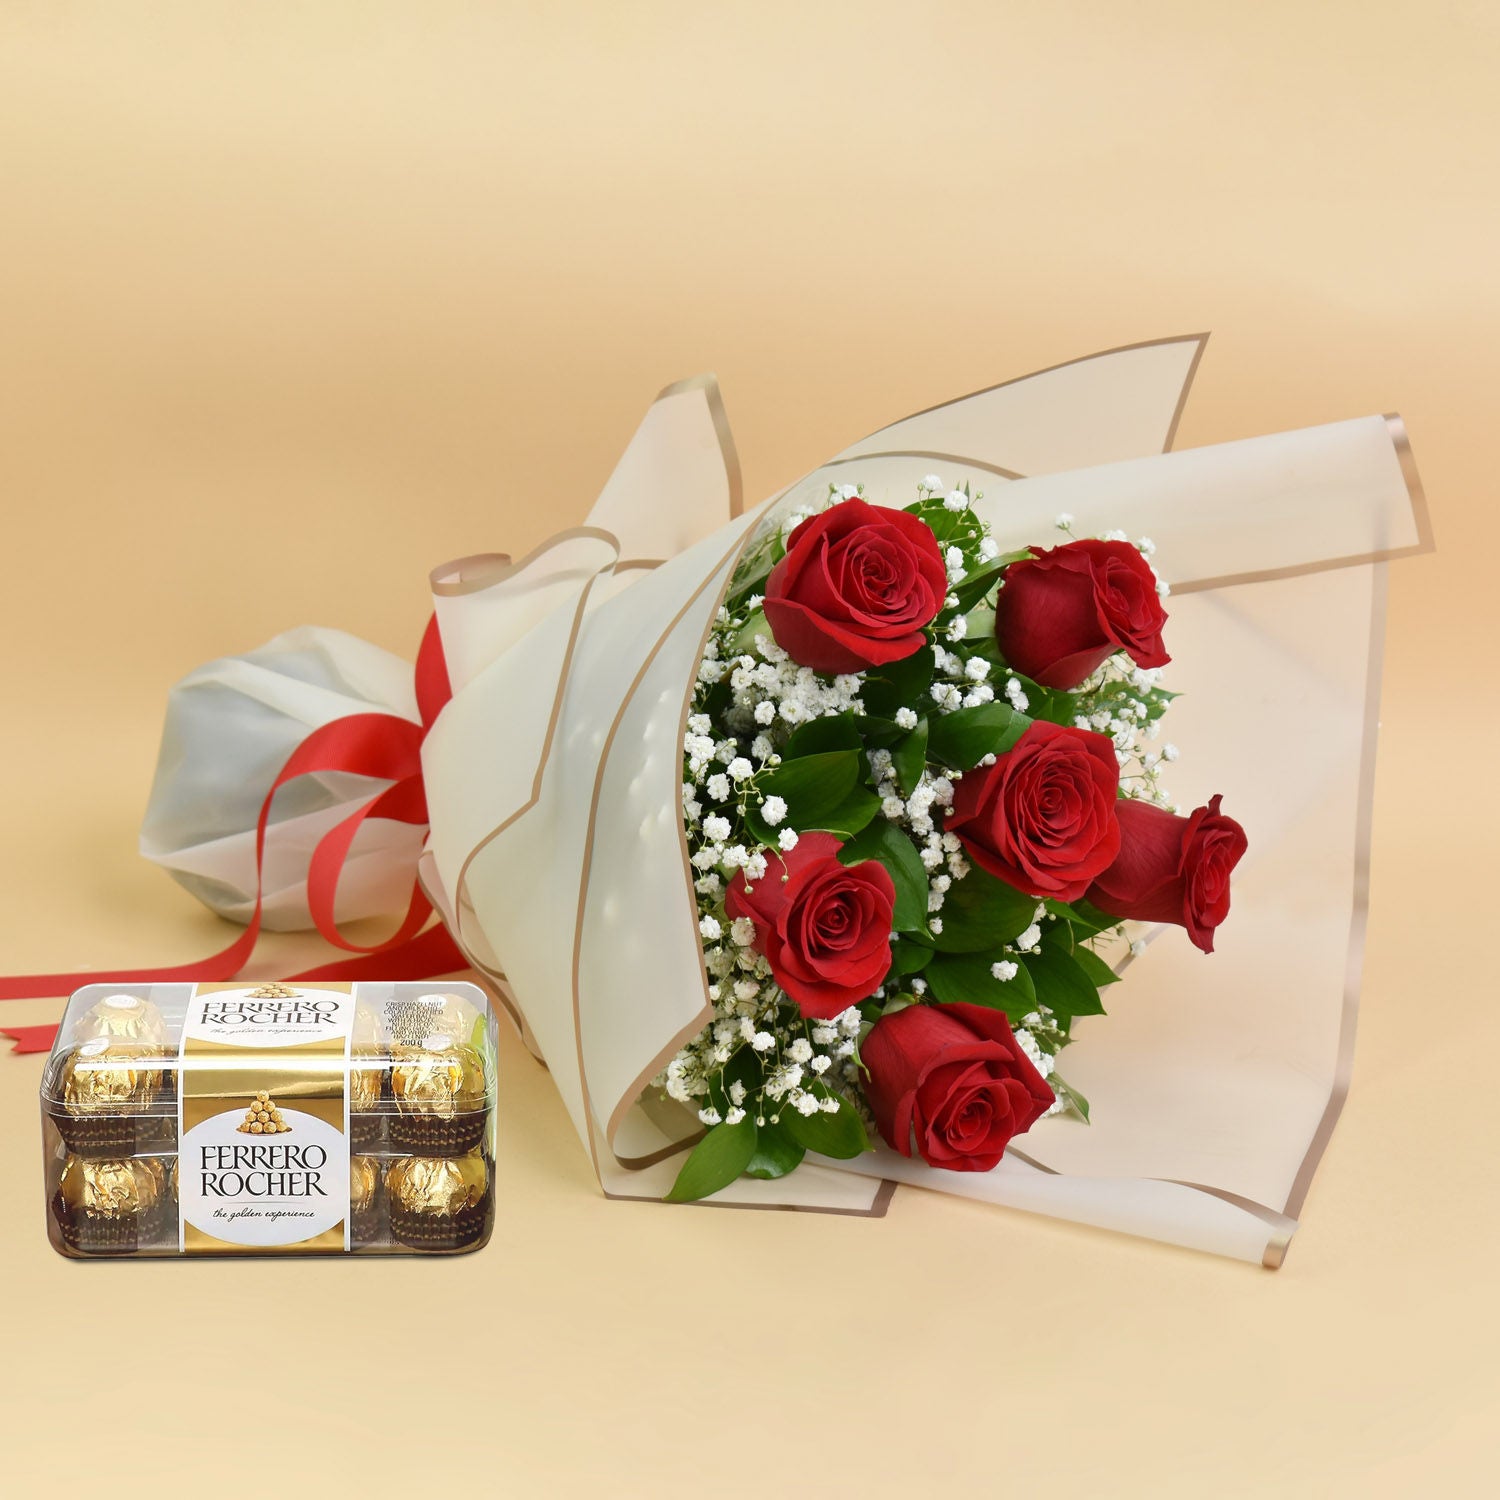 6 Roses Bouquet with Chocolates